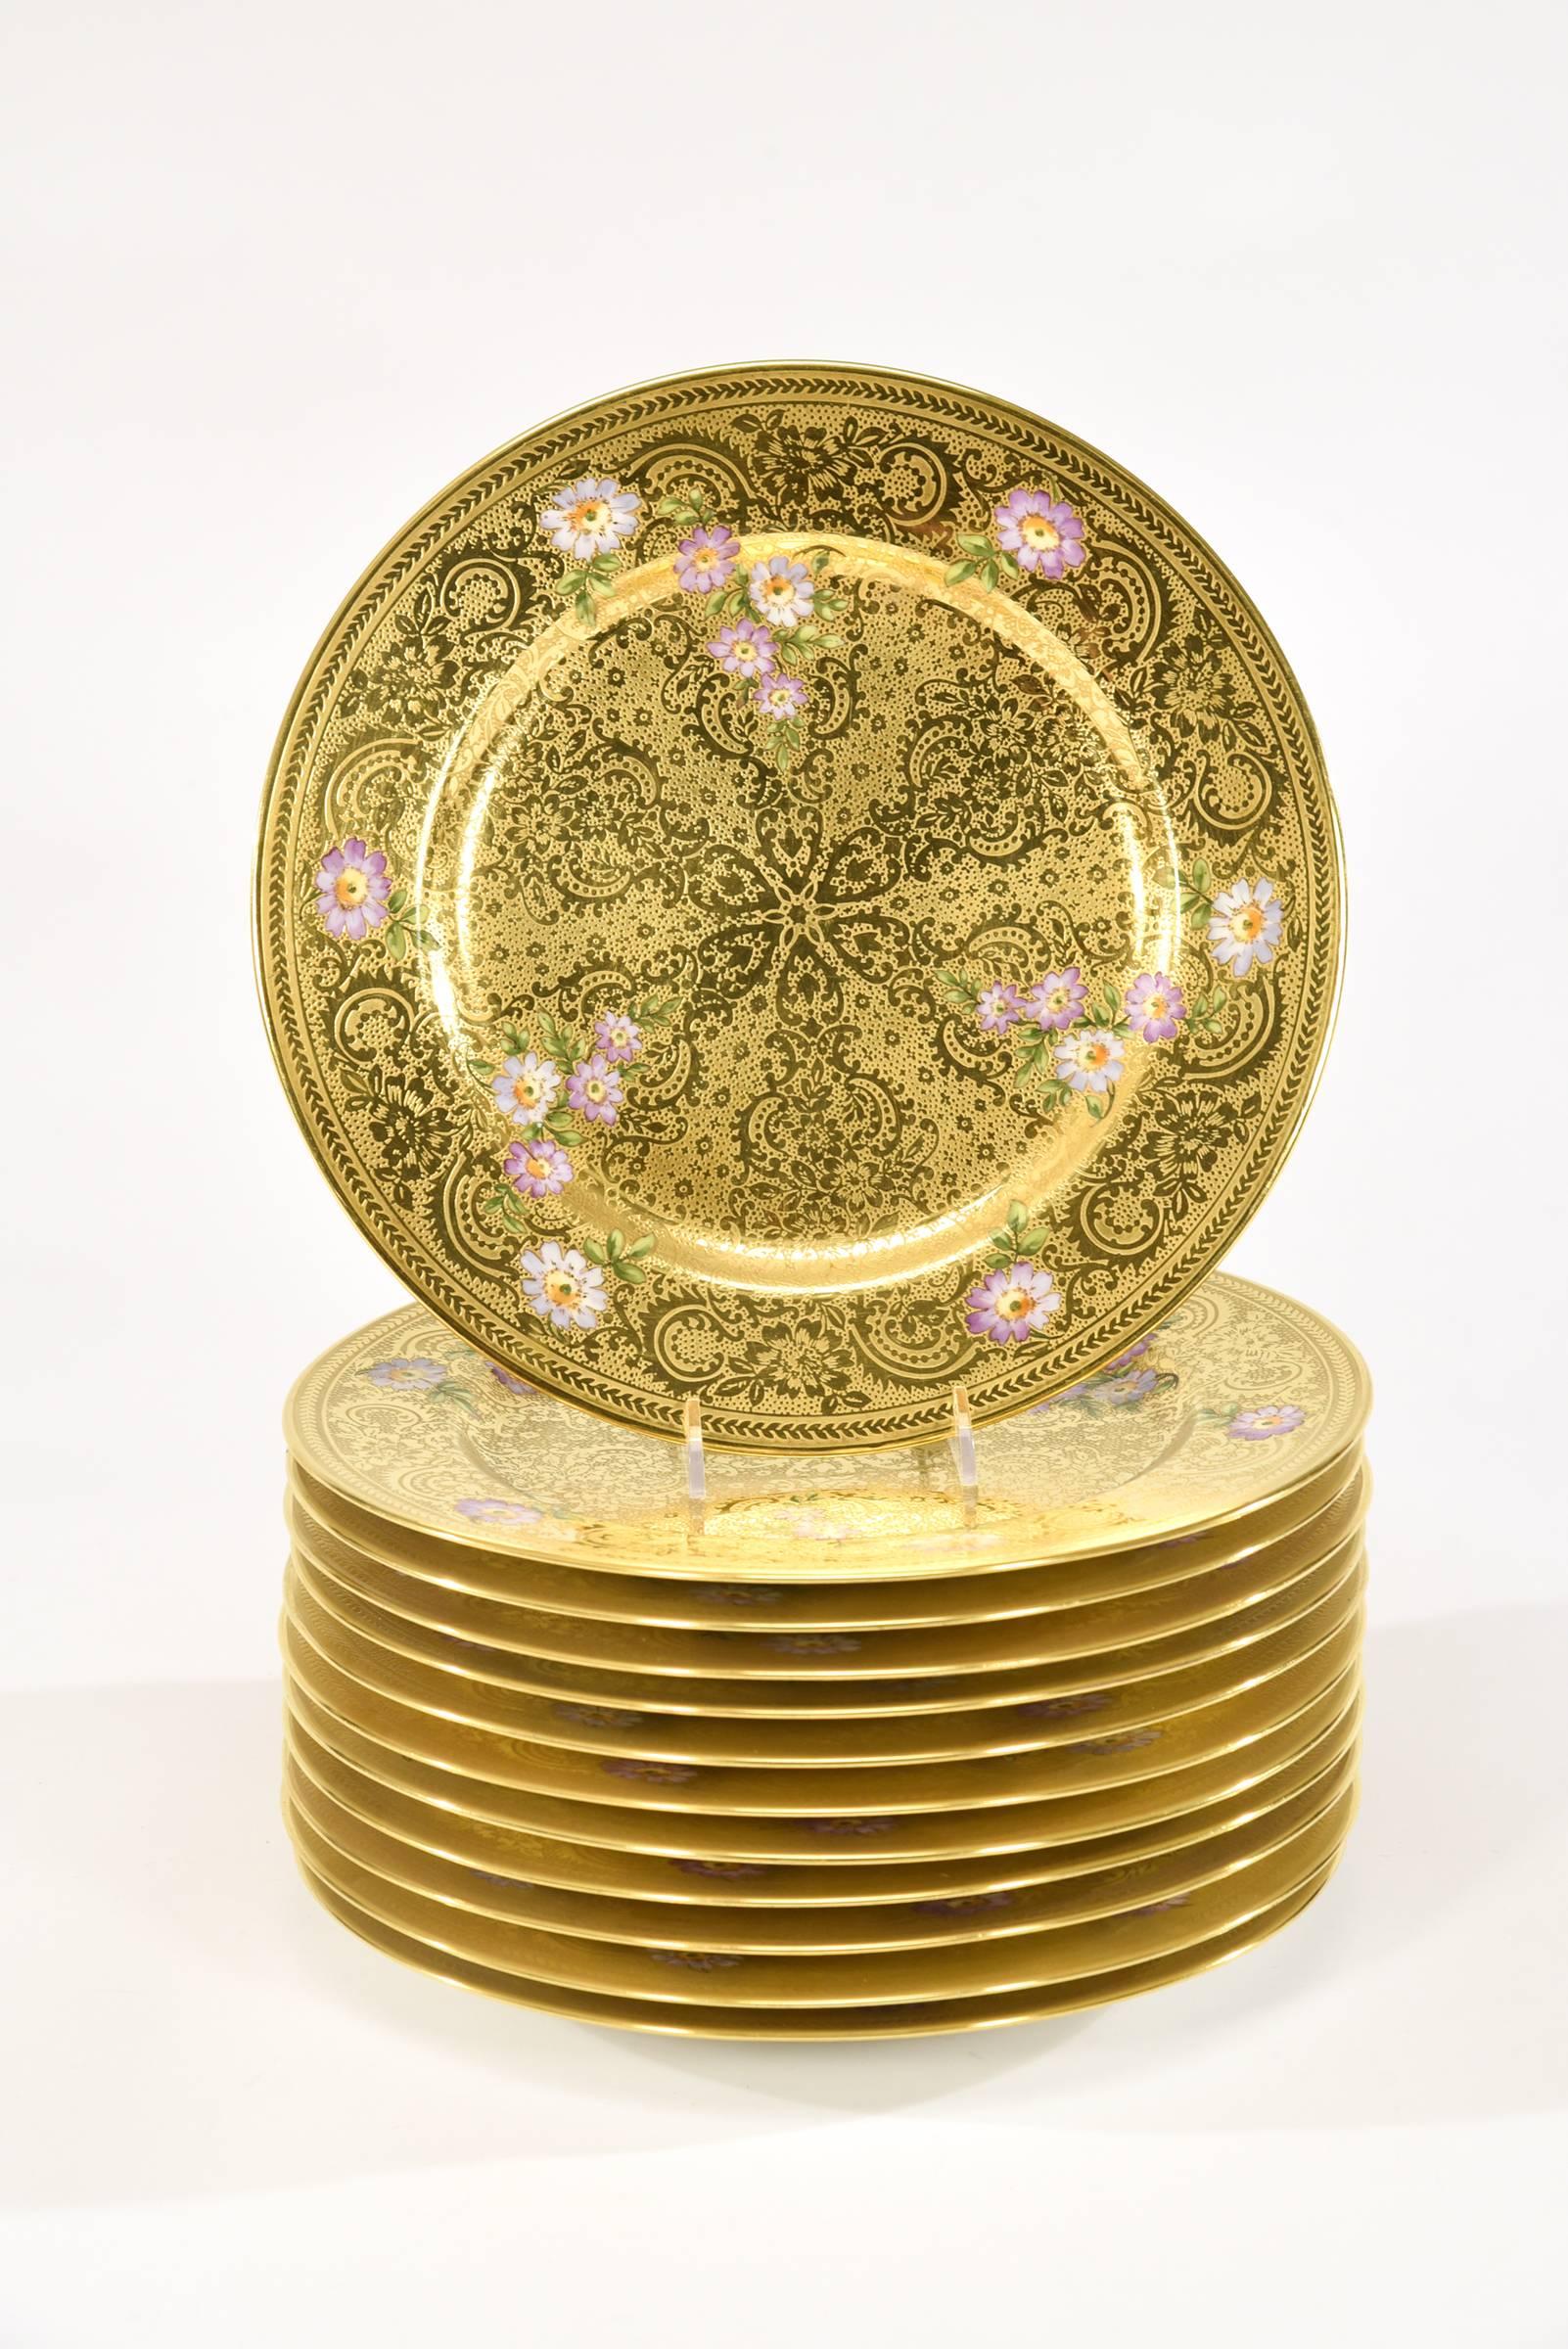 This is an exquisite set of 12 service/presentation plates that will be the focal point of your elegant table setting. Made by Limoges Elite, they feature all-over embossed and acid etched gold which is overlaid with lavender hand-painted enamel